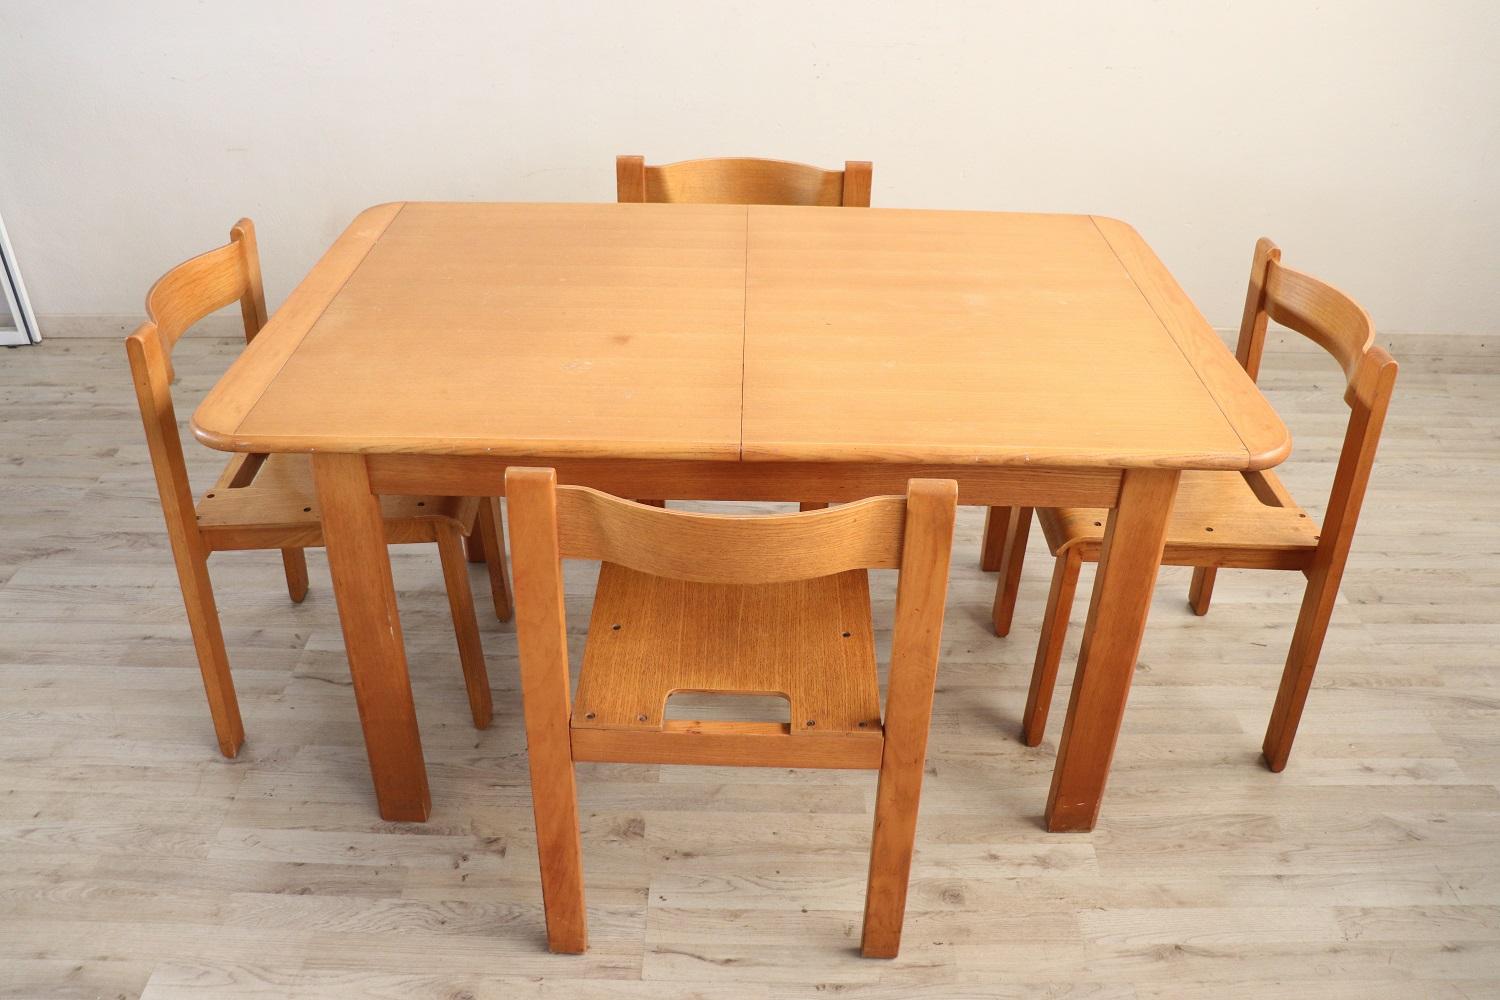 Swedish design solid oak wood dining room set, 1970s. This set includes:
1 extendable dining room table, dimensions extended table cm 185 / inch 72,83
4 chairs
Good vintage conditions.